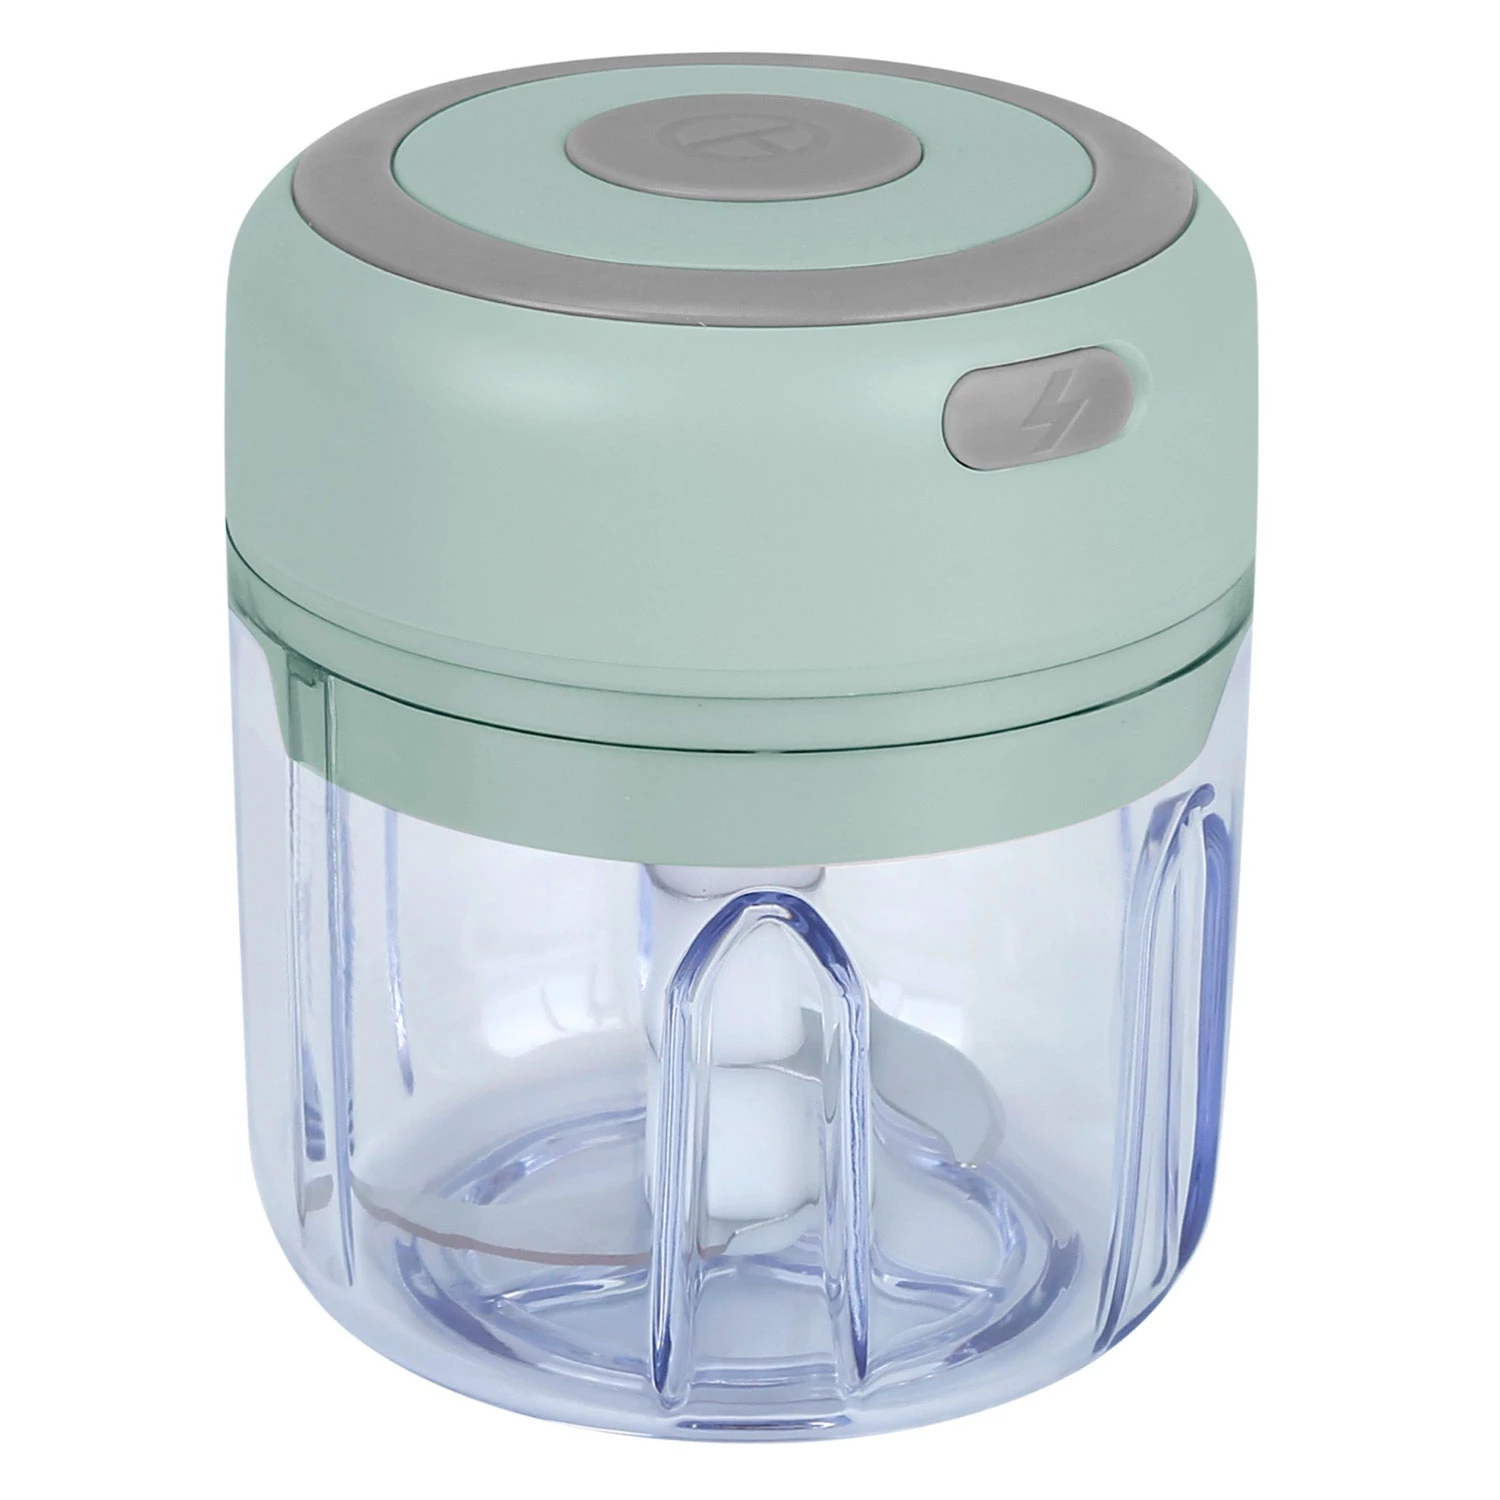 Cordless Mini Electric Garlic Chopper - Rechargeable, 8.45OZ - Ideal for Food, Chili, Nuts, Onions, 